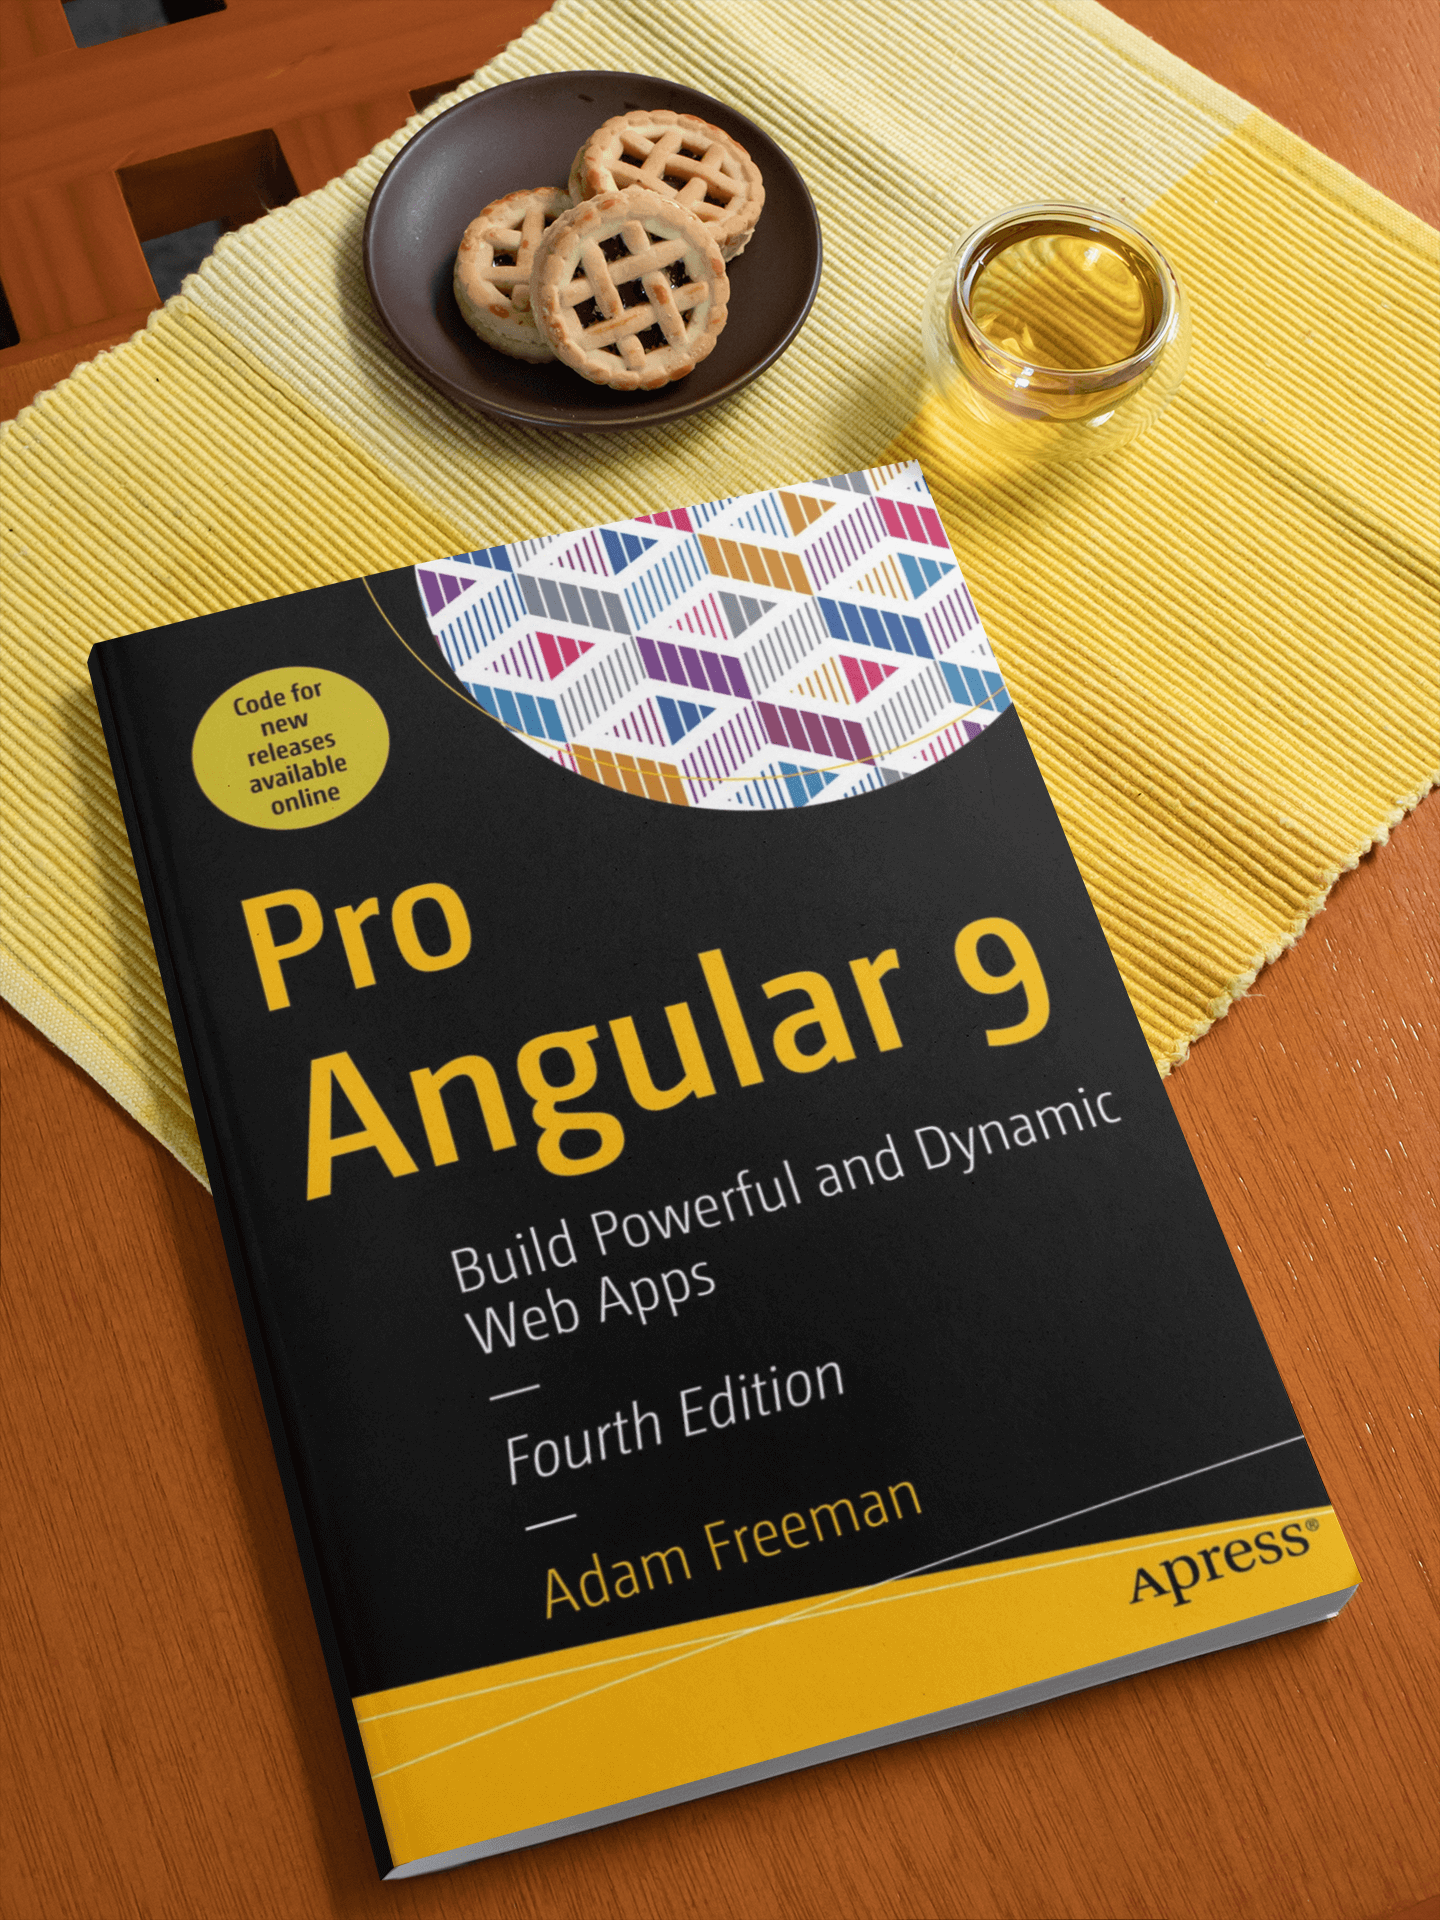 Pro Angular 9 is a June 2020 release that teaches cutting-edge AngularJS concepts in Angular 9 and Angular 10.